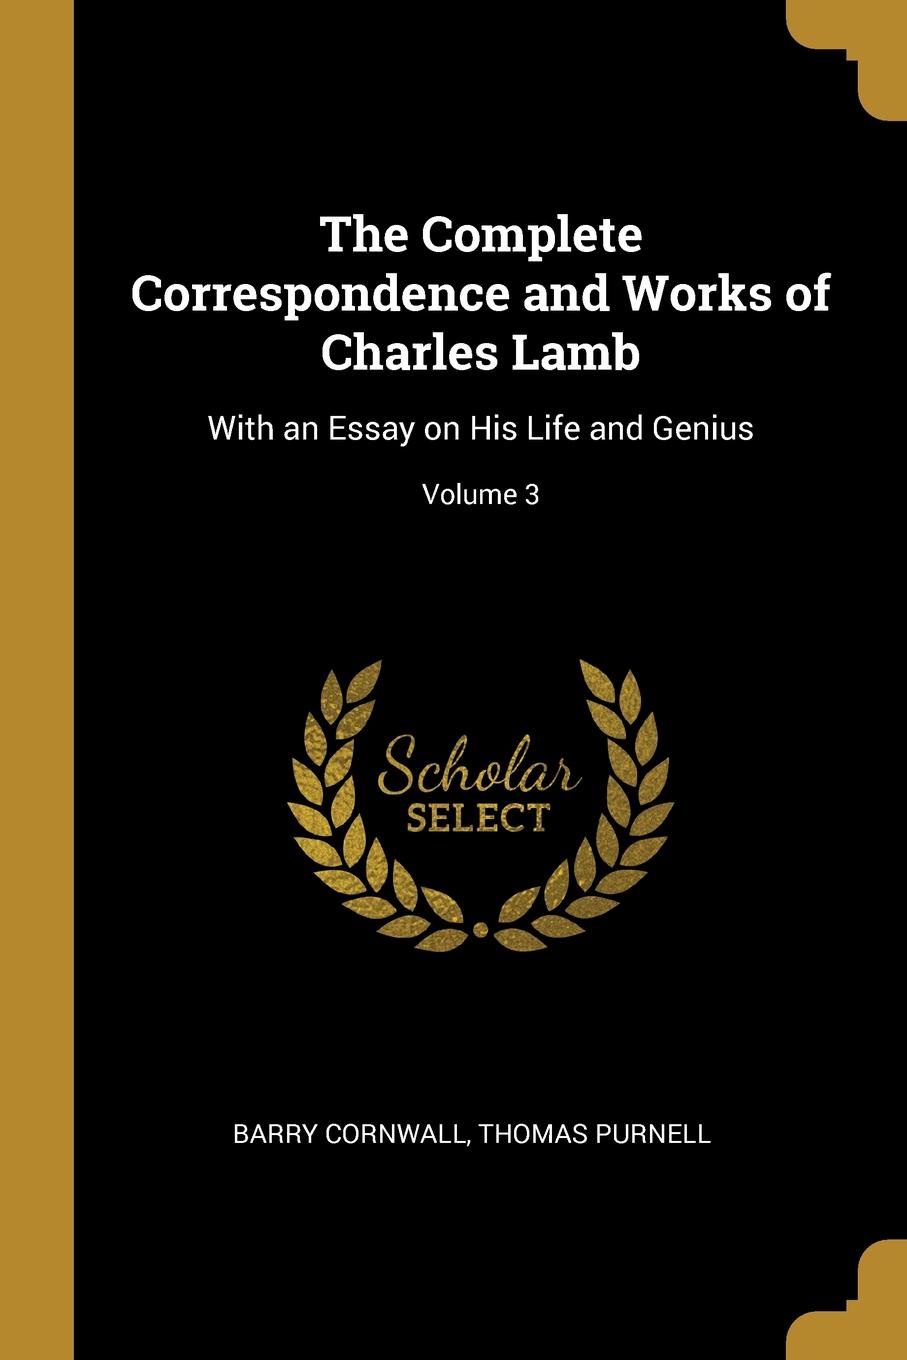 The Complete Correspondence and Works of Charles Lamb. With an Essay on His Life and Genius; Volume 3